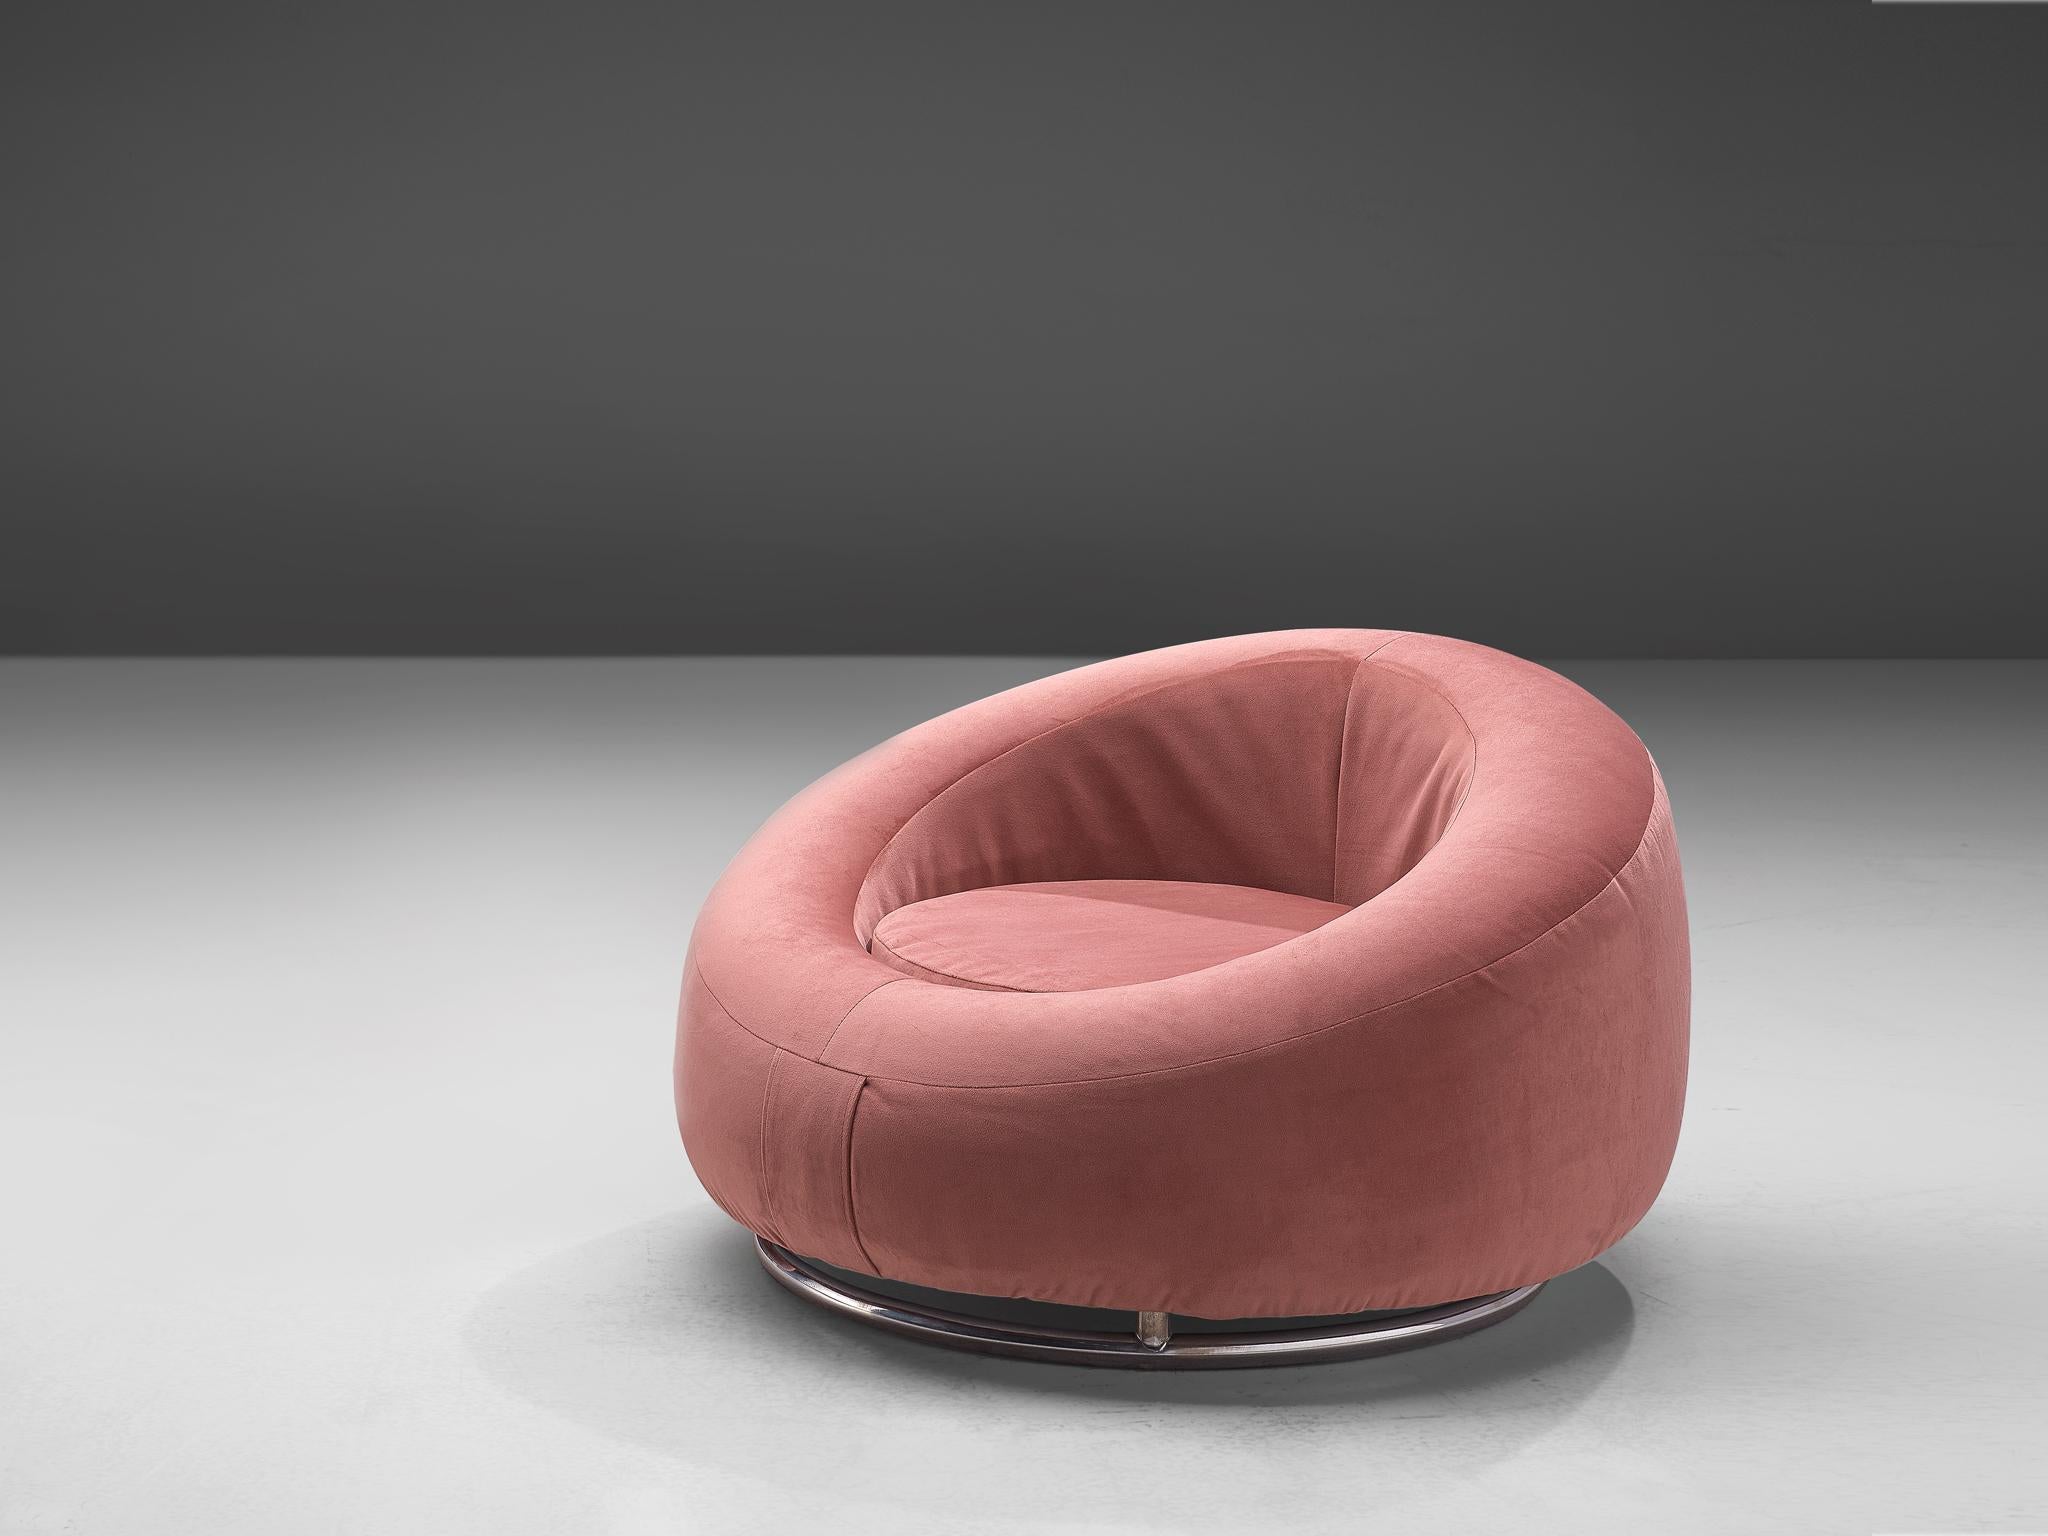 Club chairs, pink velvet and chromed metal, Italy, 1970s.

This lounge chair is a must if you are looking for some Hollywood Regency pieces for your interior. The low seat features a circular shape with a thick shell around that functions as